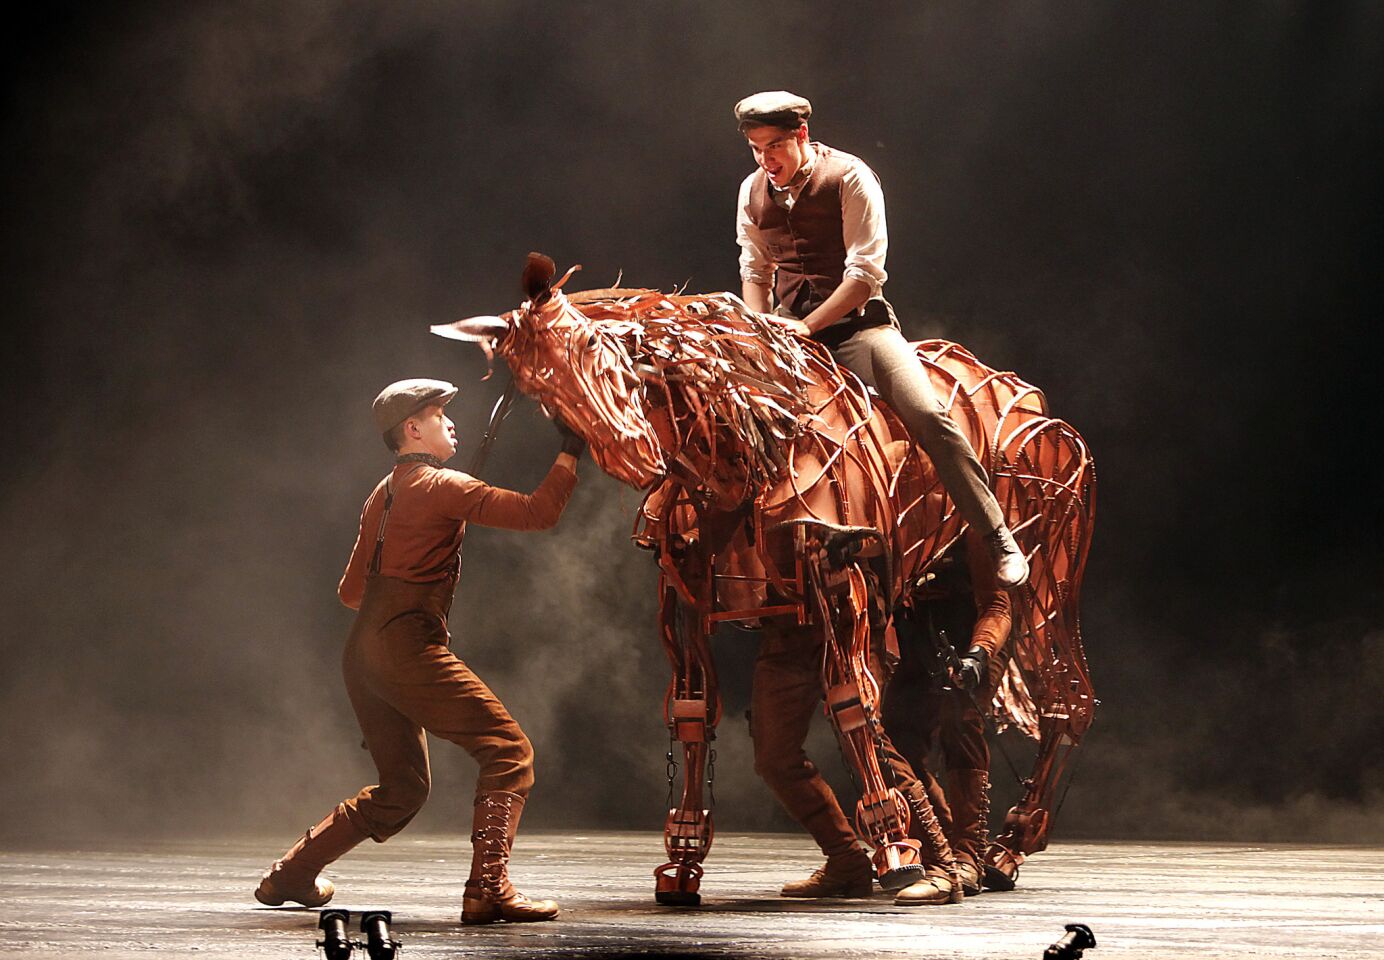 Andrew Veenstra (playing Albert Narracott) mounts the horse Joey for the first time in the Tony Award-winning play "War Horse" at the Ahmanson Theatre in July. Puppeteer Christopher Mai operates the head of the horse. Review: "War Horse" at Ahmanson Theatre is a marvel of stagecraft | Photos